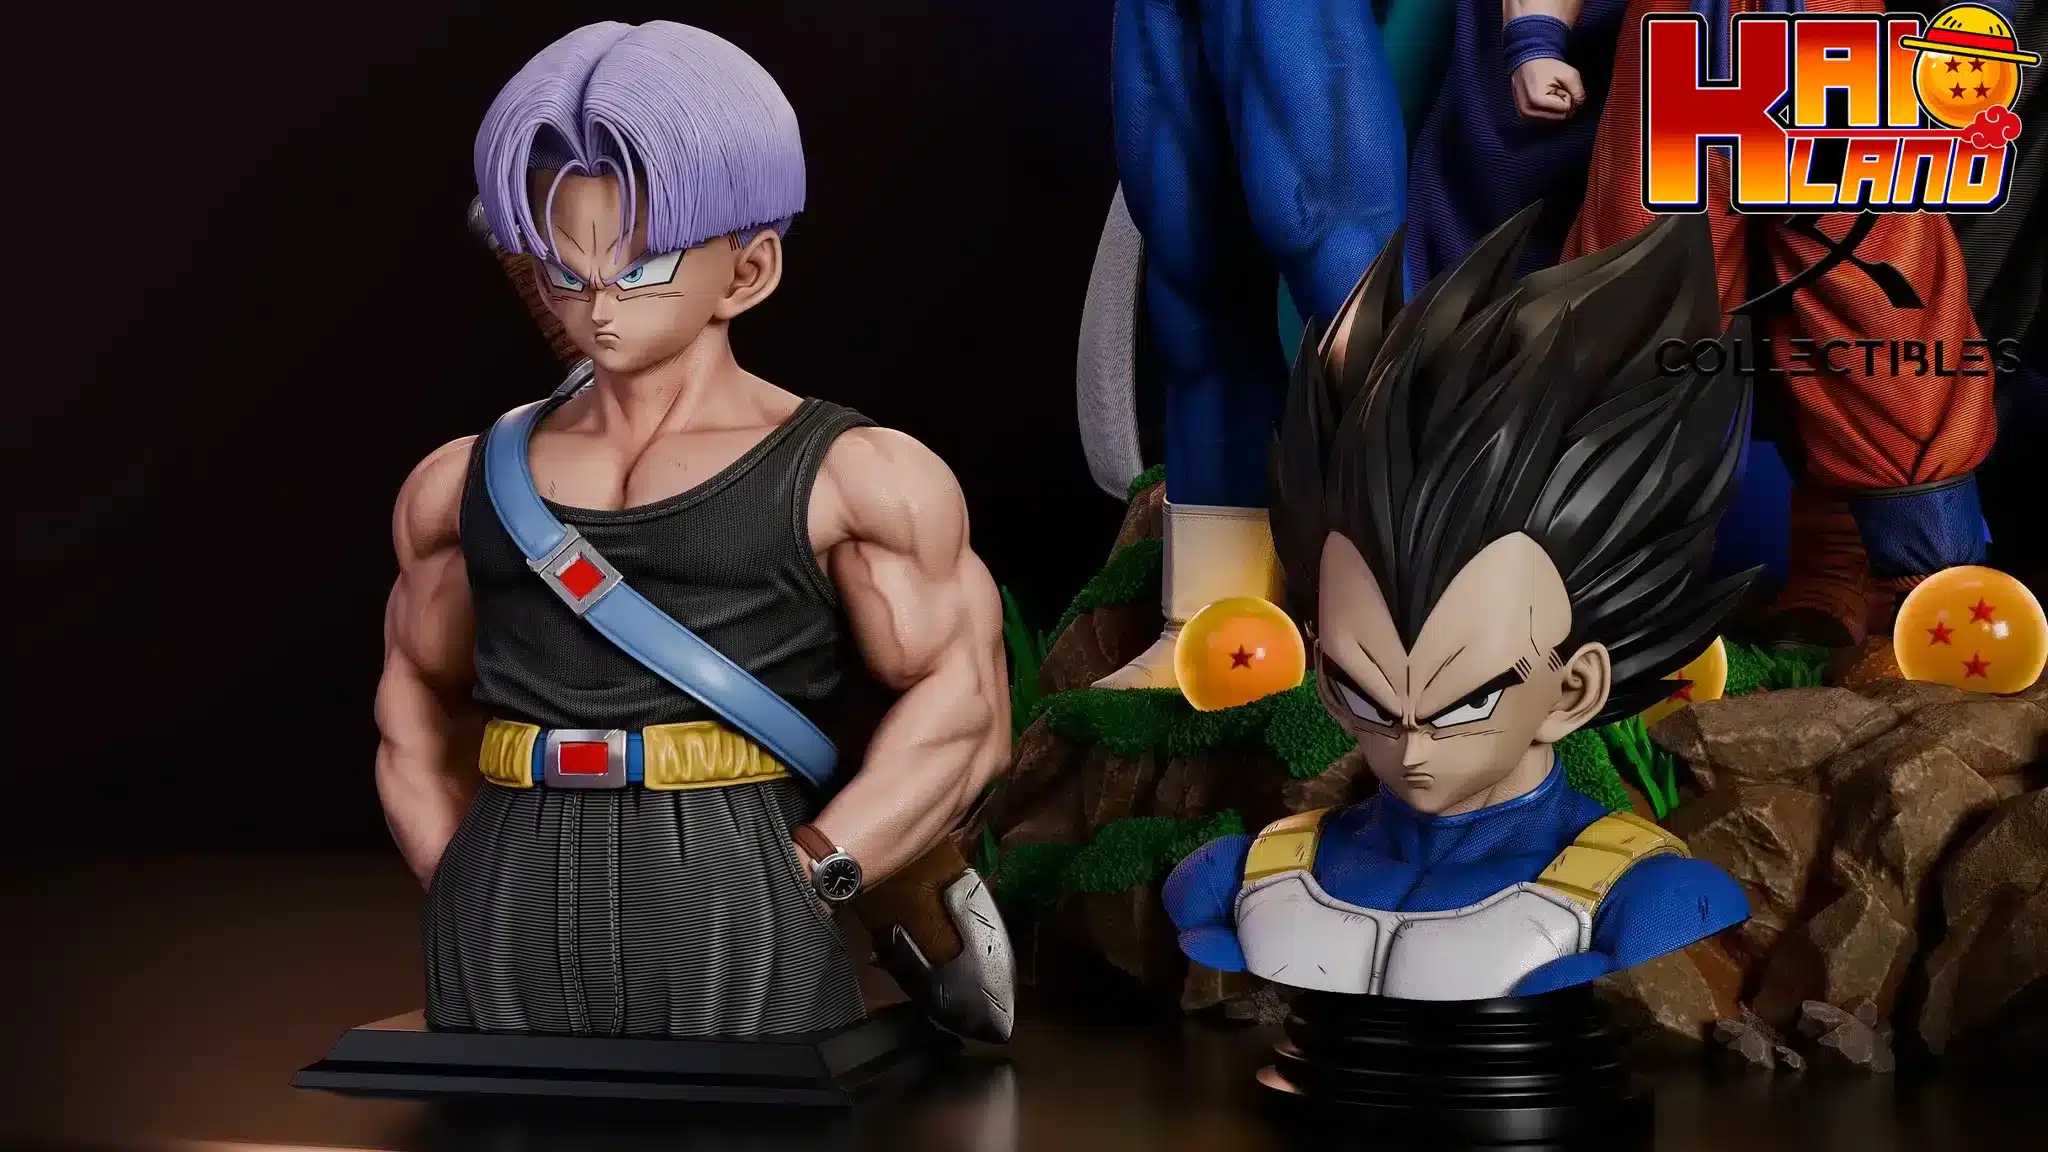 Dragon-Ball-KD-Collectibles-Z-Fighters-Resin-Statue-11-jpg.png